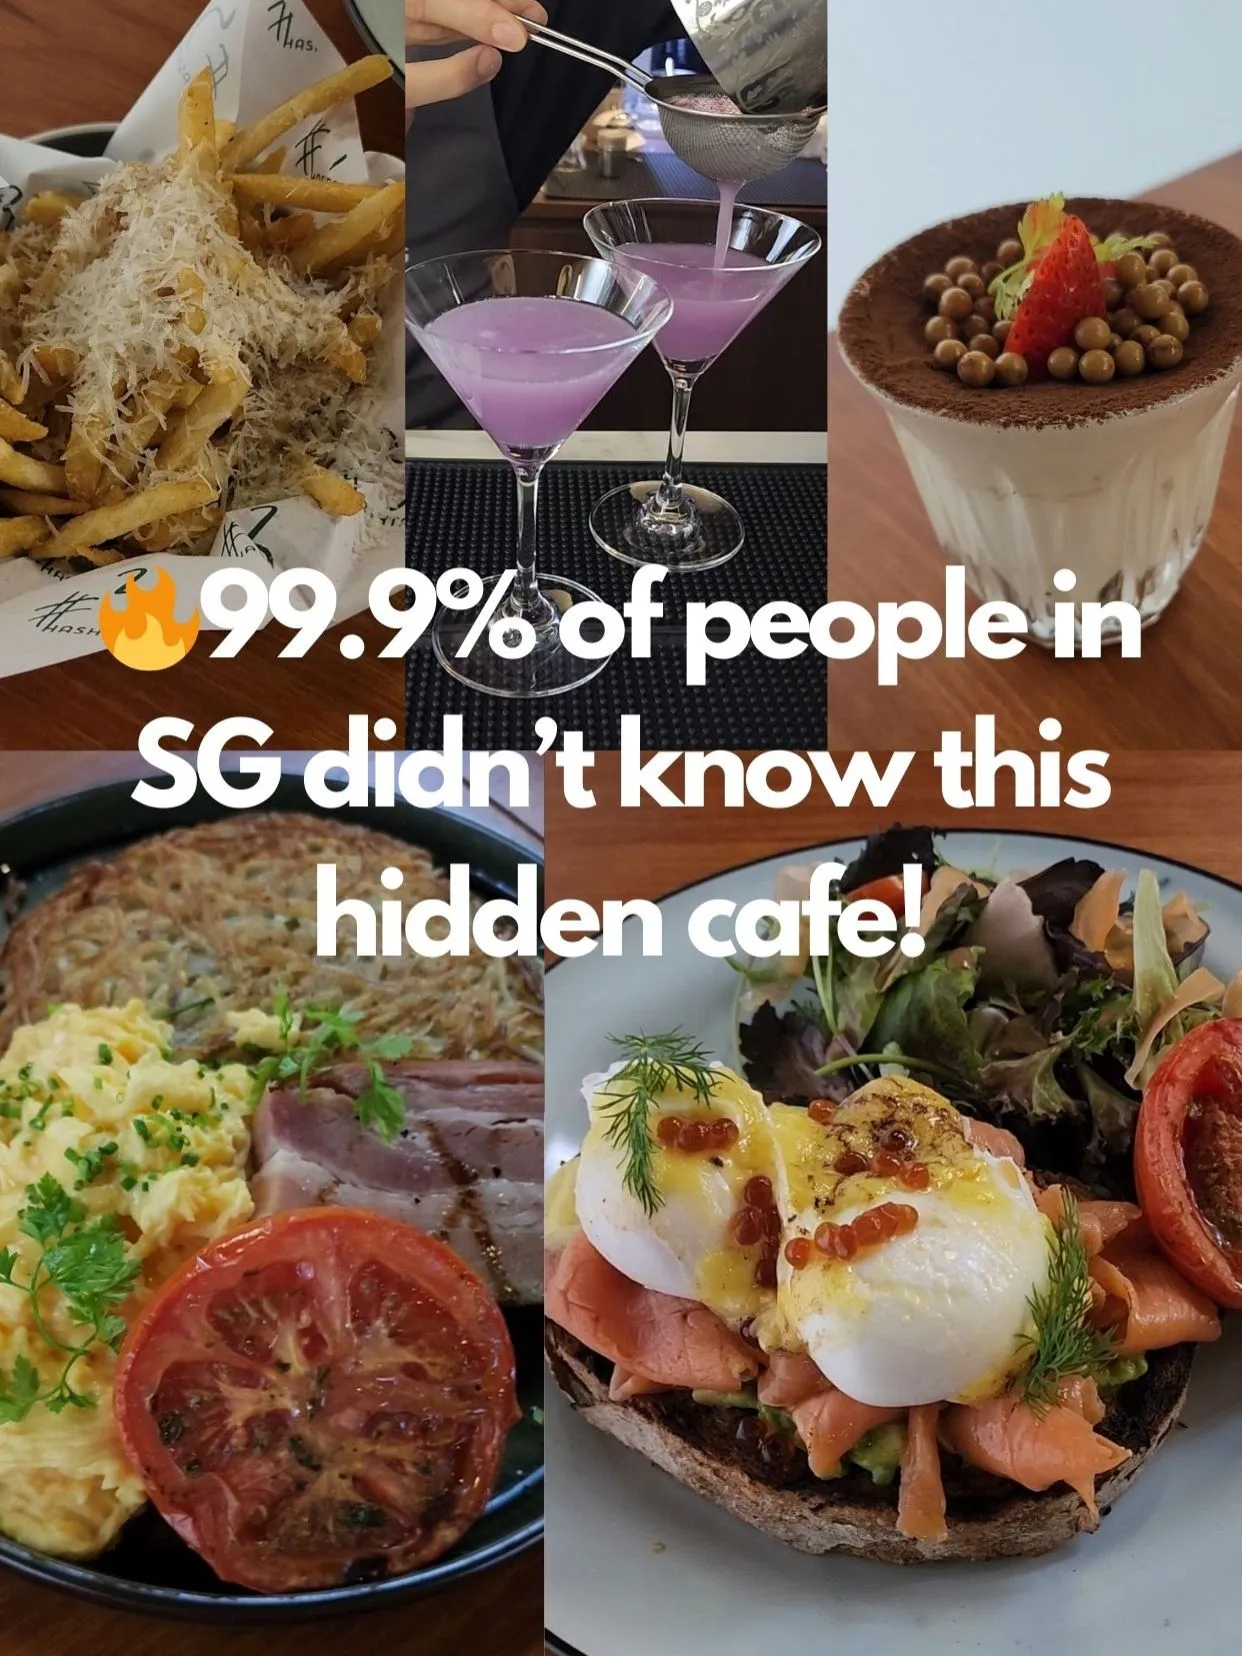 99.9% of people in SG didn’t know this hidden cafe's images